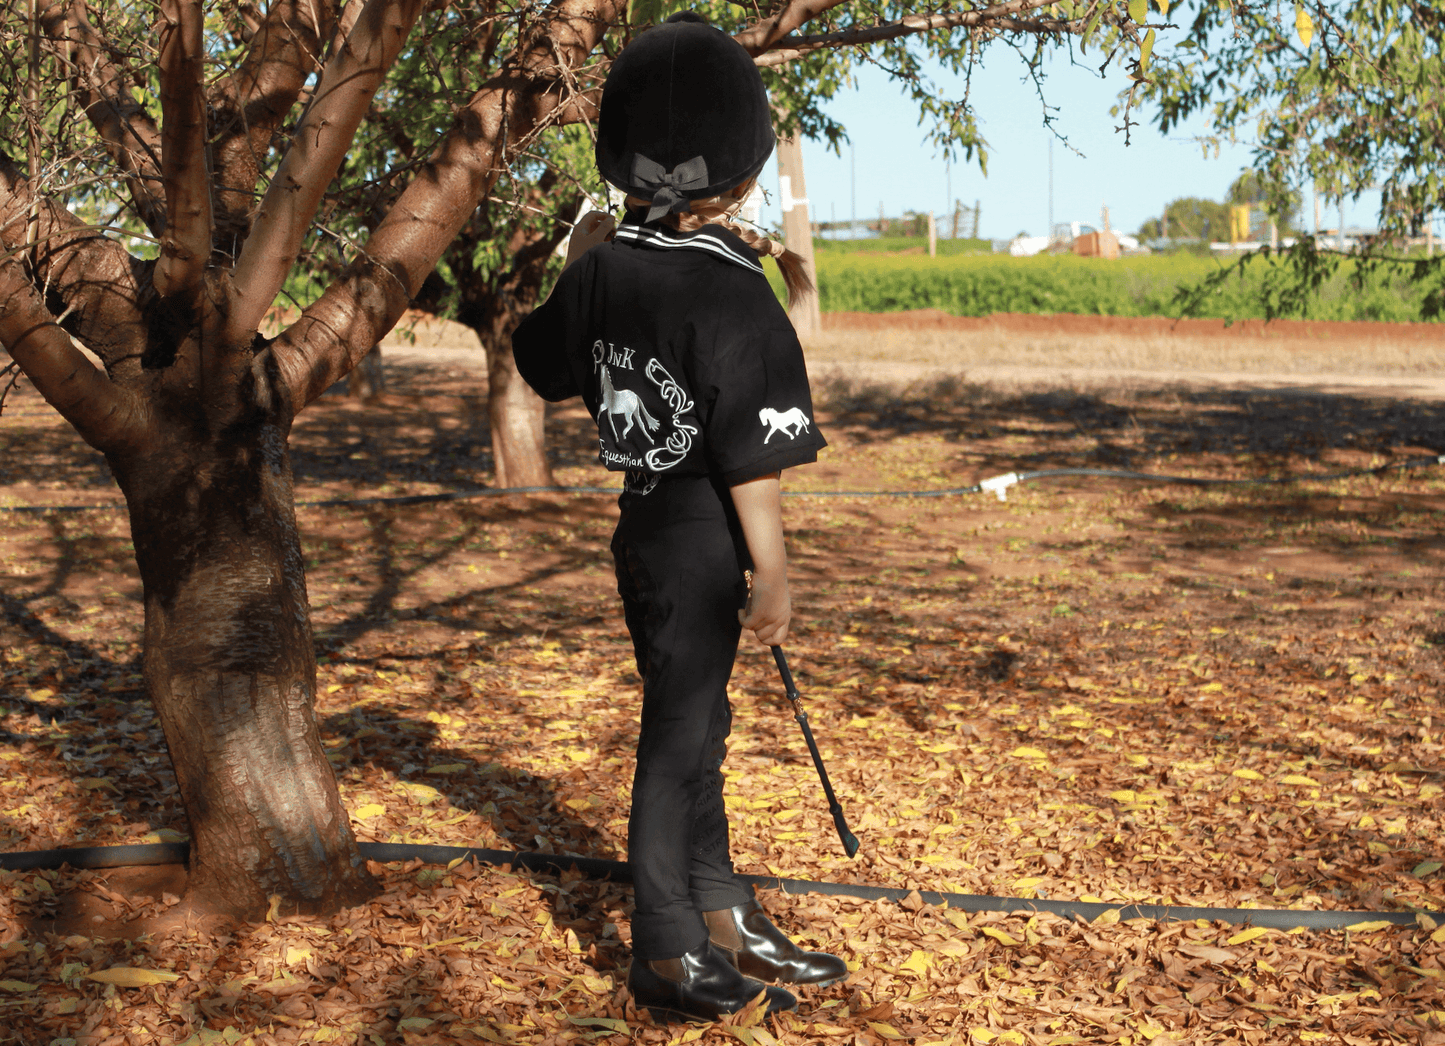 Child in horse riding tights and helmet stands by tree outdoors.